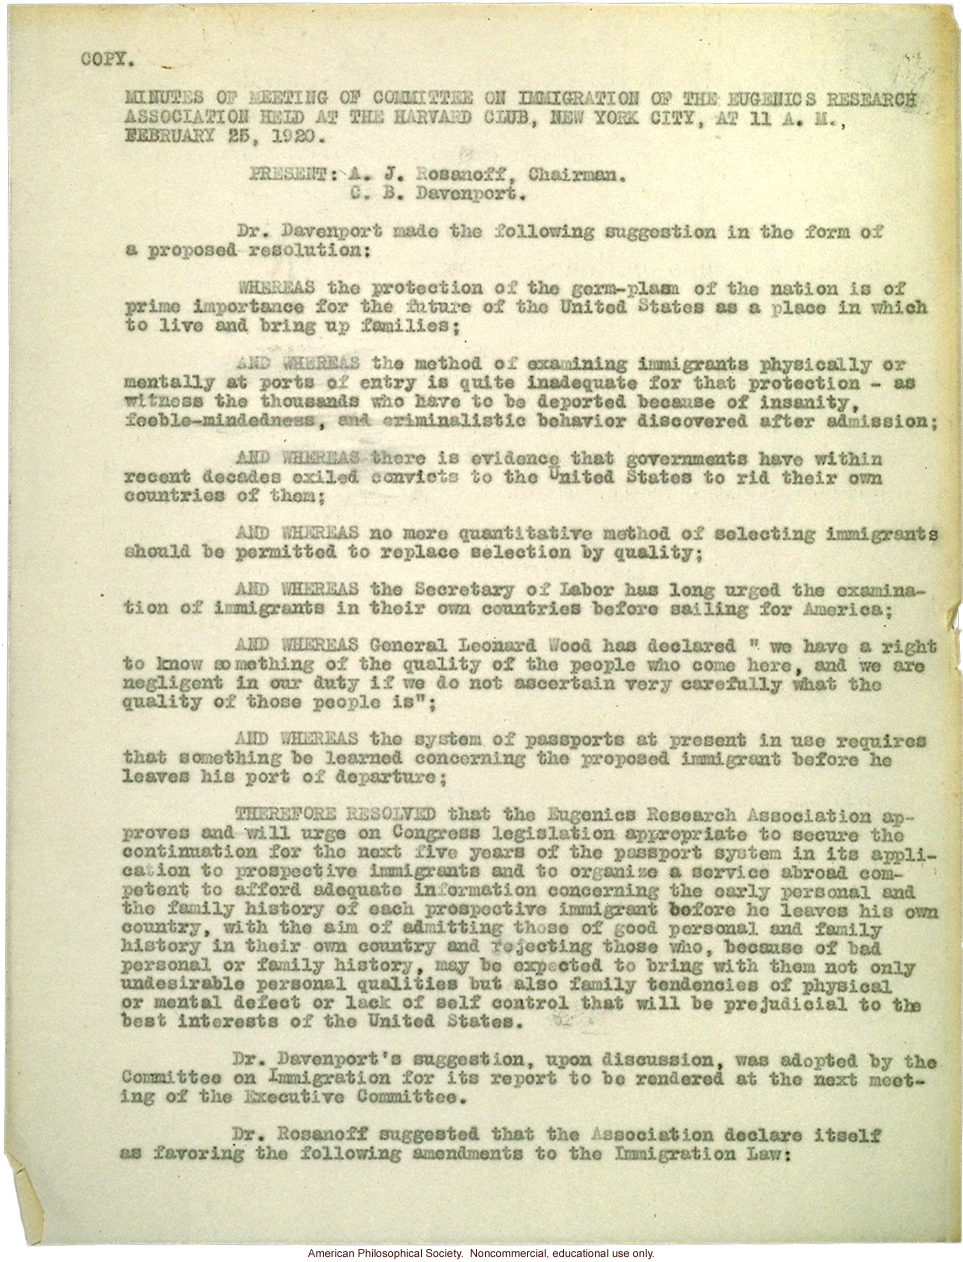 &quote;Minutes of meeting of Commitee on Immigration of the Eugenics Research Association&quote;